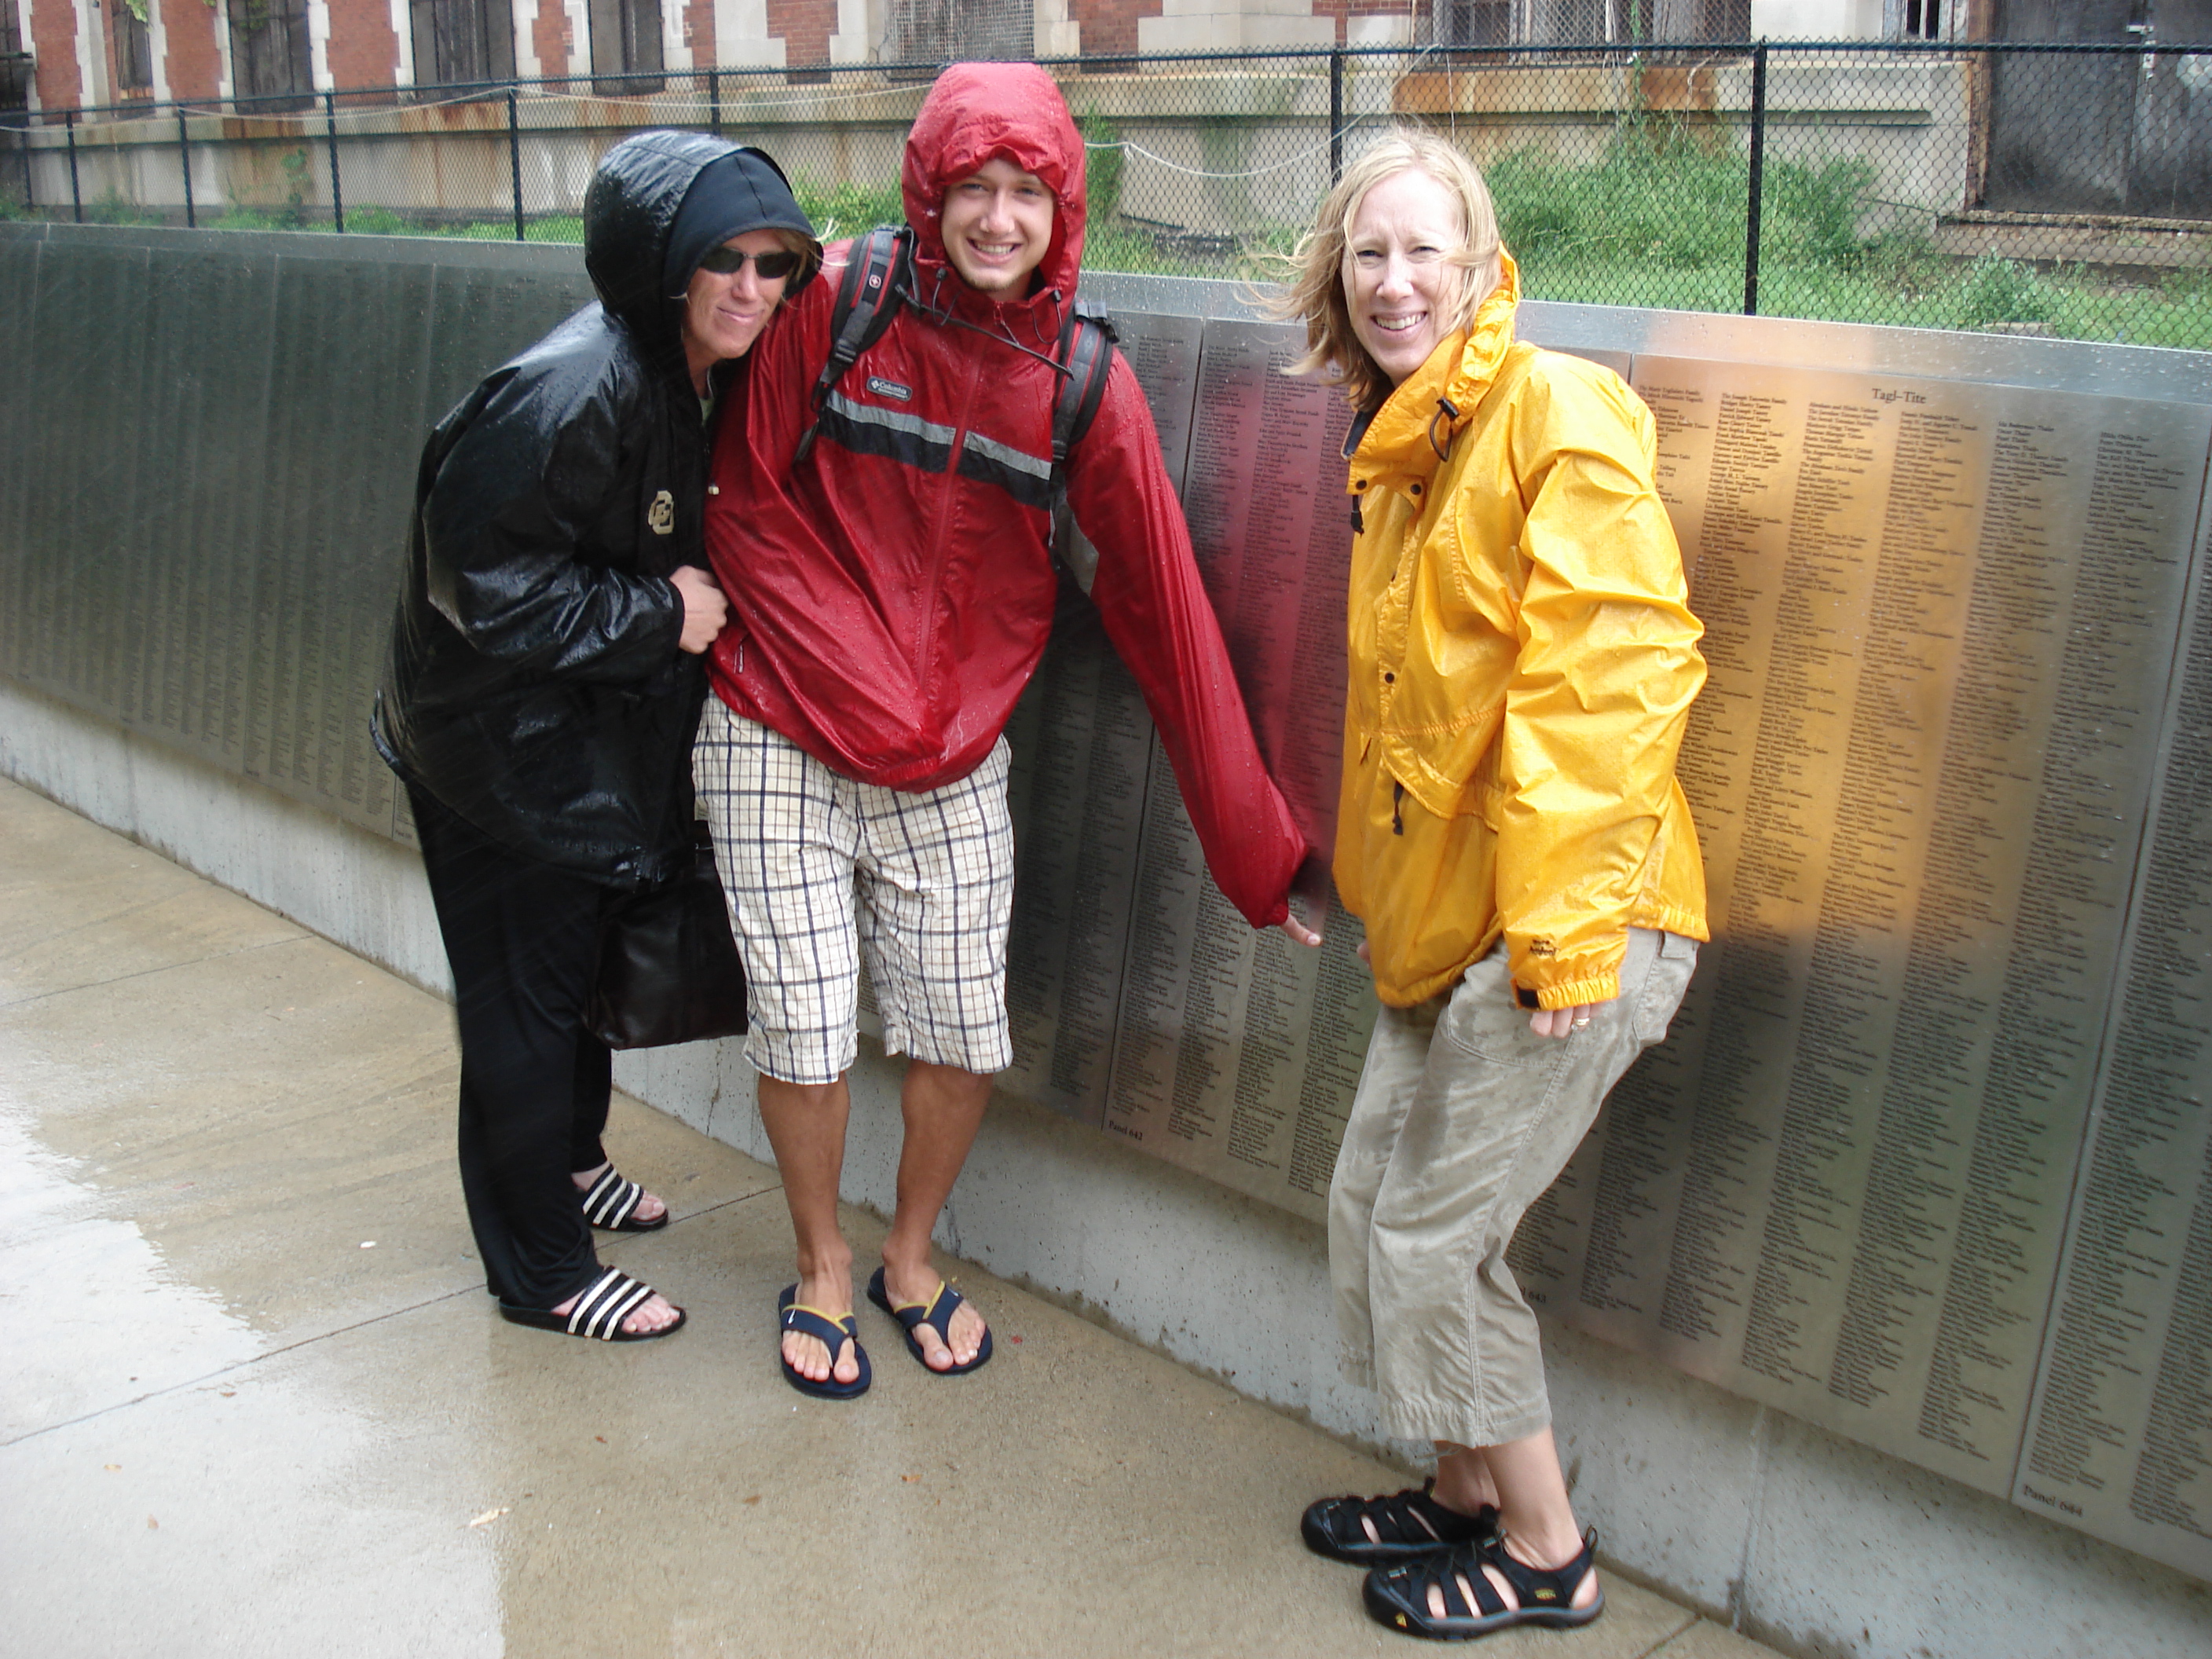 Wendy Swanhorst, John Swanhorst and Jann Engelstad in 2007 at the Wall of Honor near Grandpa Fred and Grandma Erika's inscribed names.  Yes, it was a terribly rainy day!